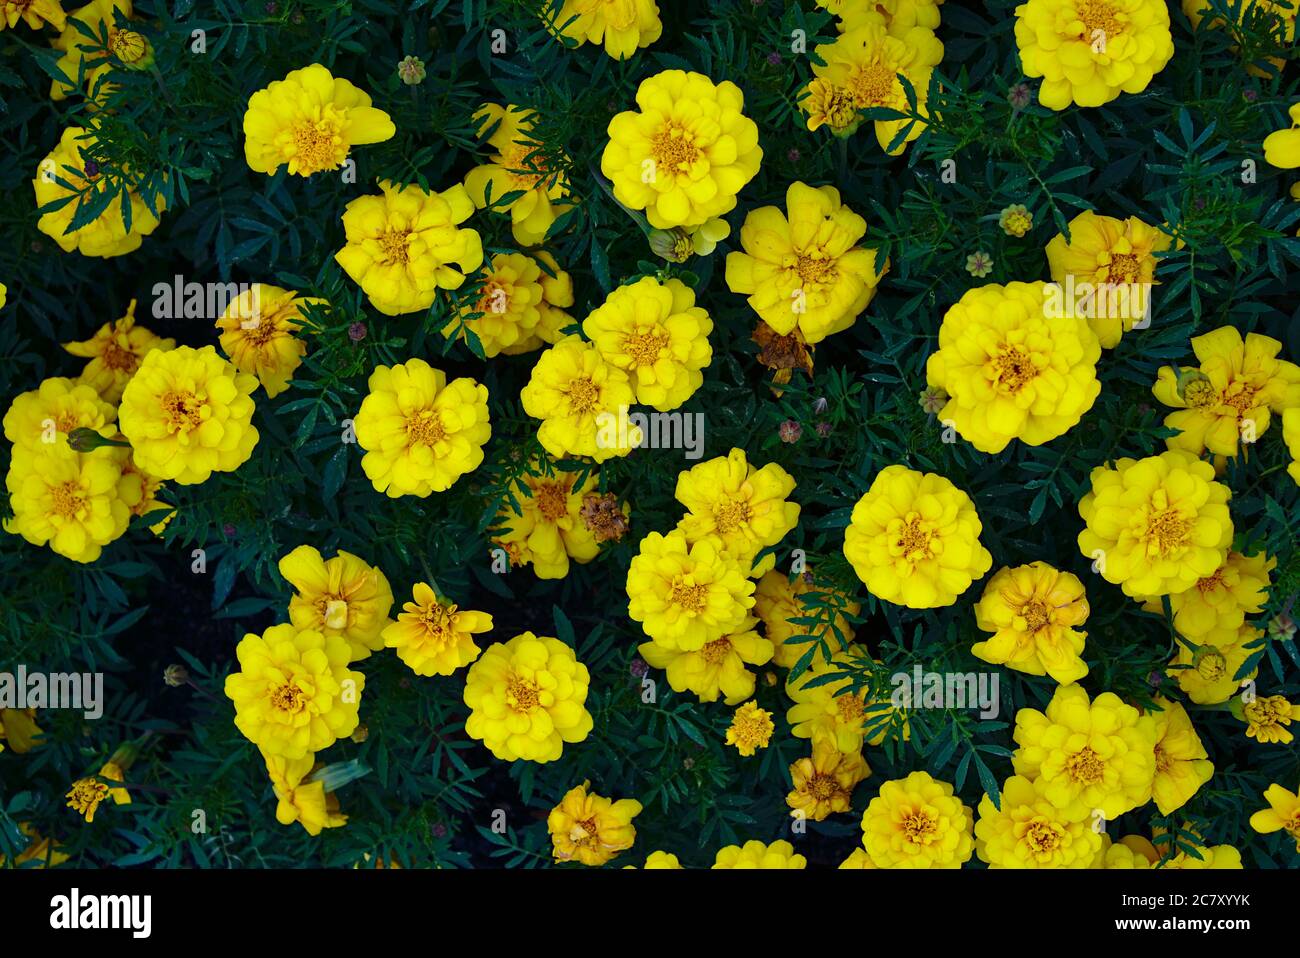 Top view of yellow flowers with green leaves in between Stock Photo